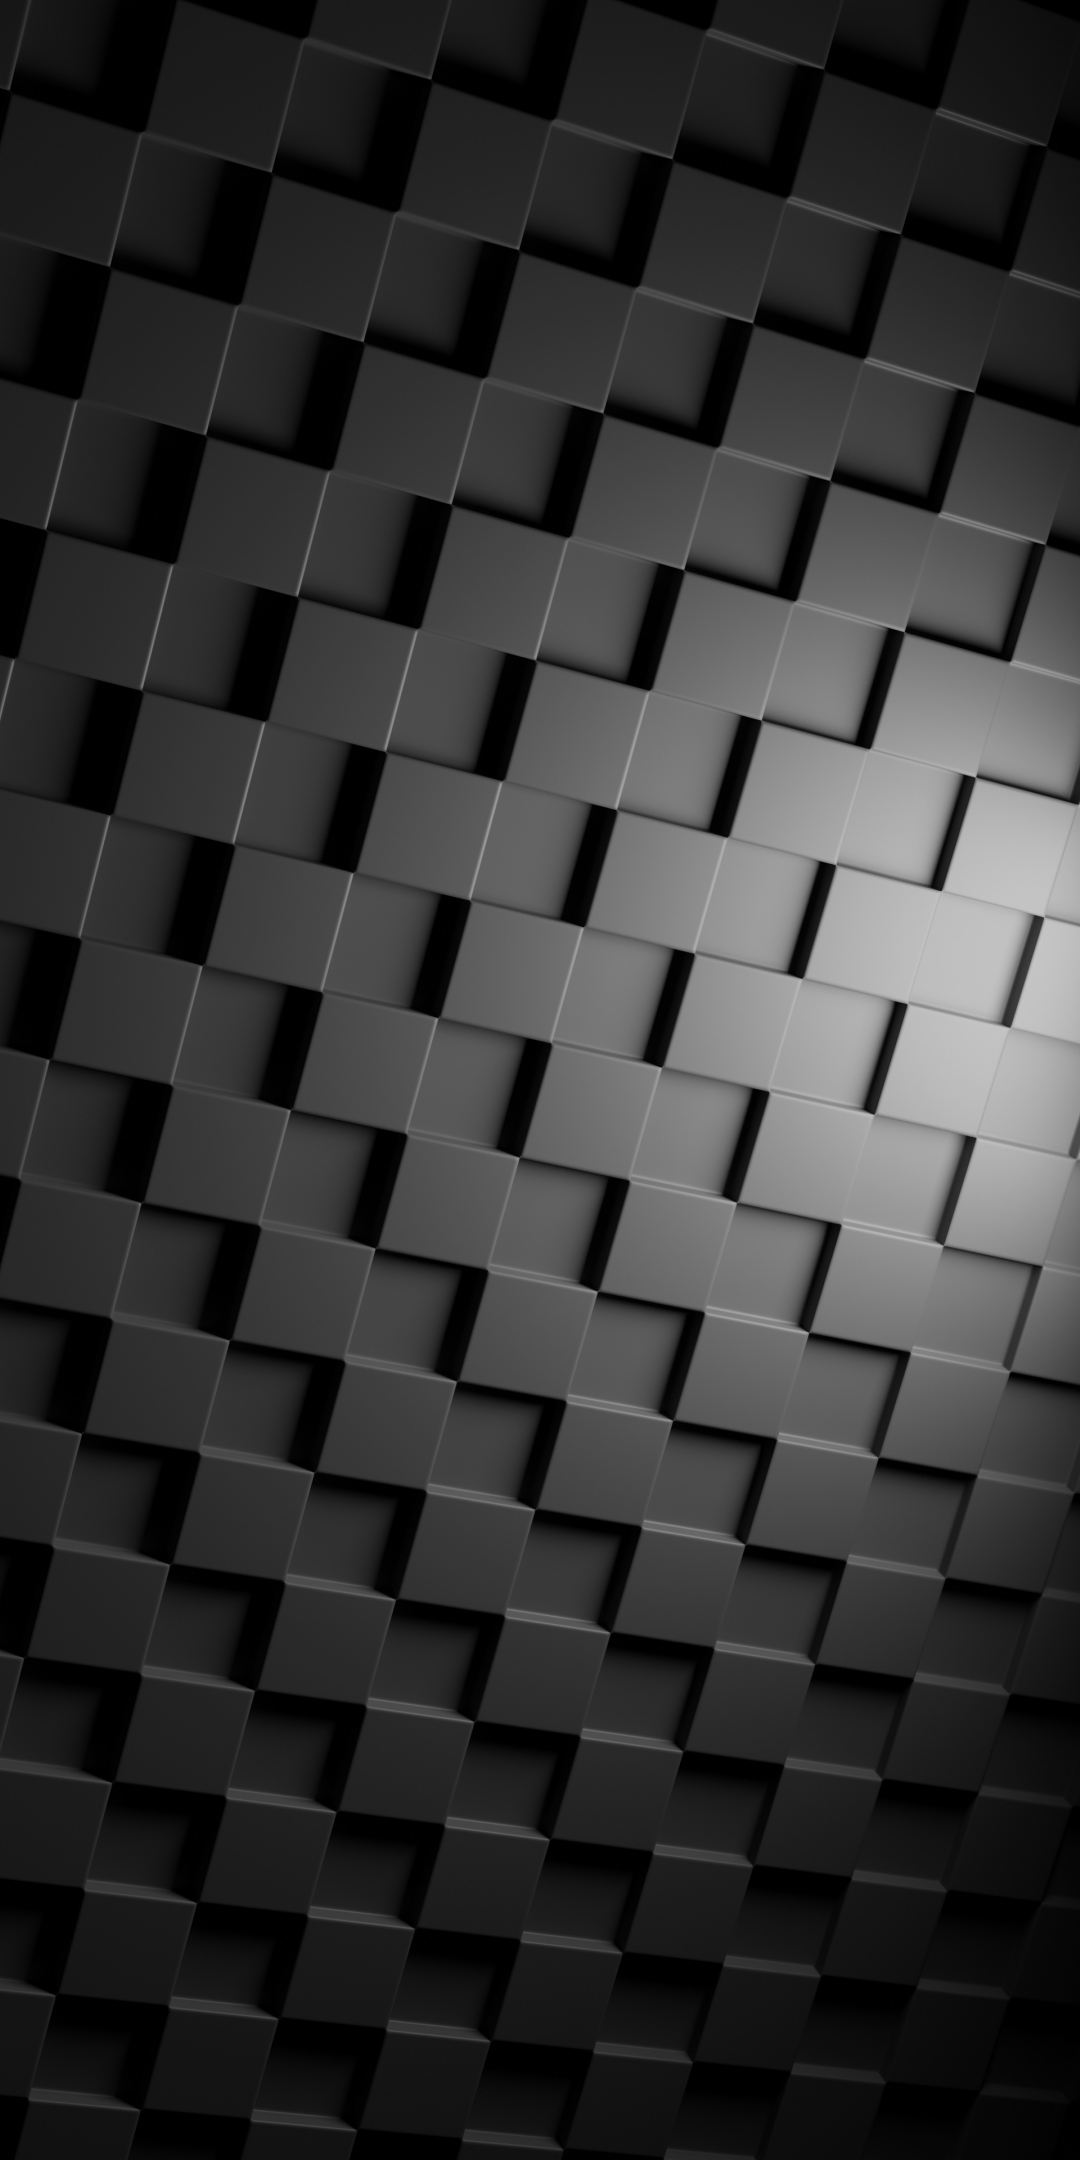 Cube, black grids, texture, abstract, 1080x2160 wallpaper